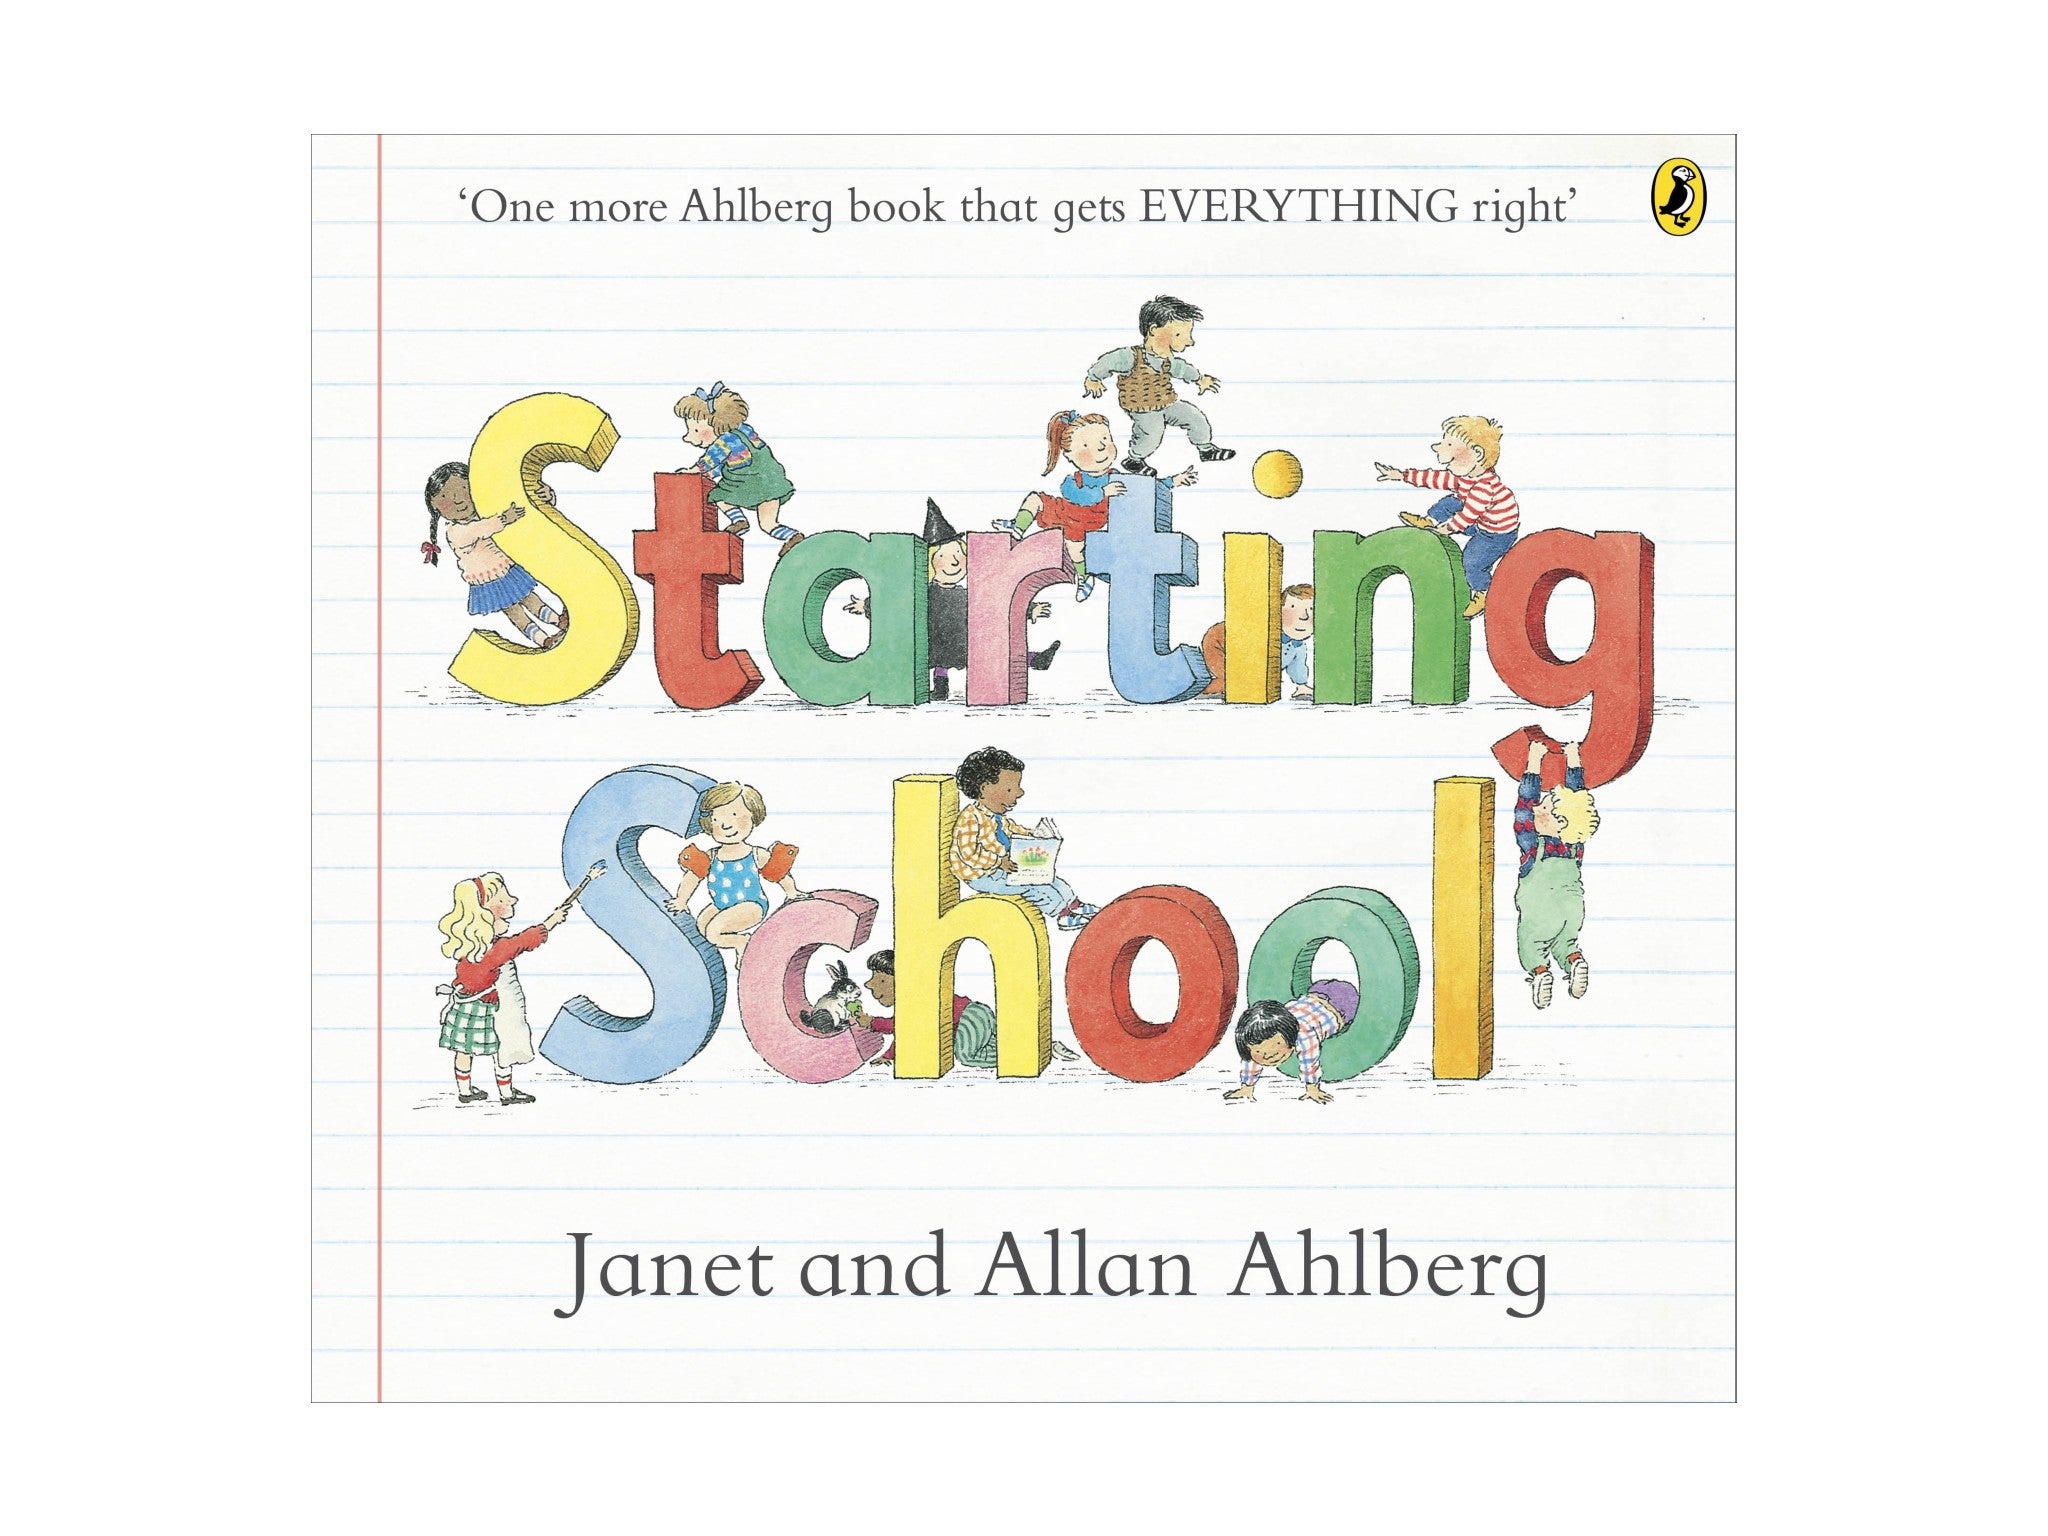 Starting School, by Janet and Allan Ahlberg, published by Puffin indybest.jpeg